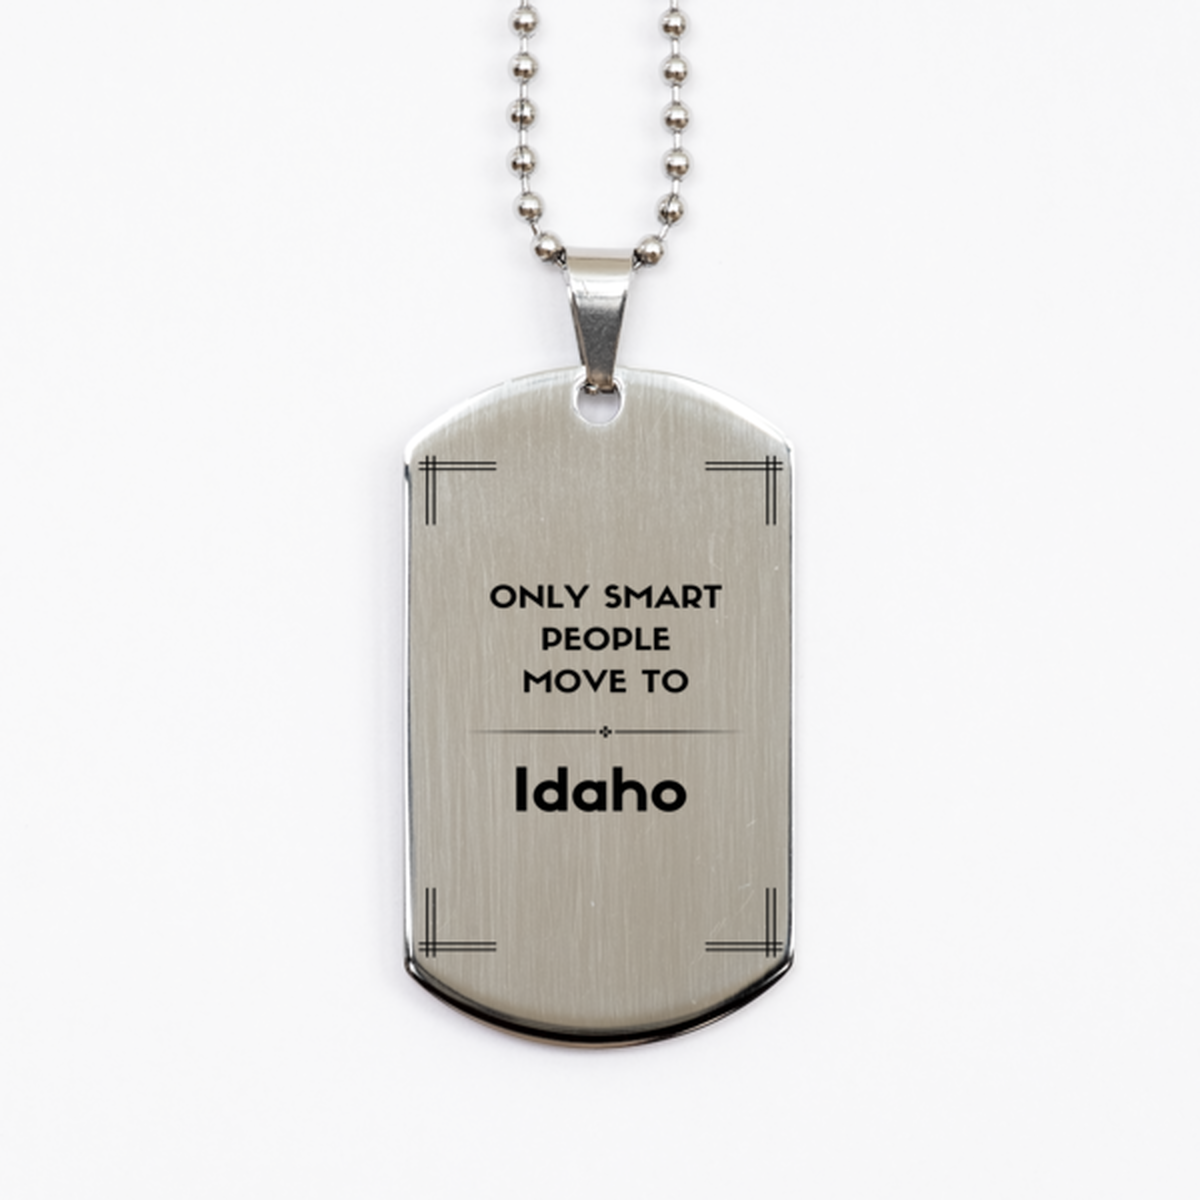 Only smart people move to Idaho Silver Dog Tag, Gag Gifts For Idaho, Move to Idaho Gifts for Friends Coworker Funny Saying Quote